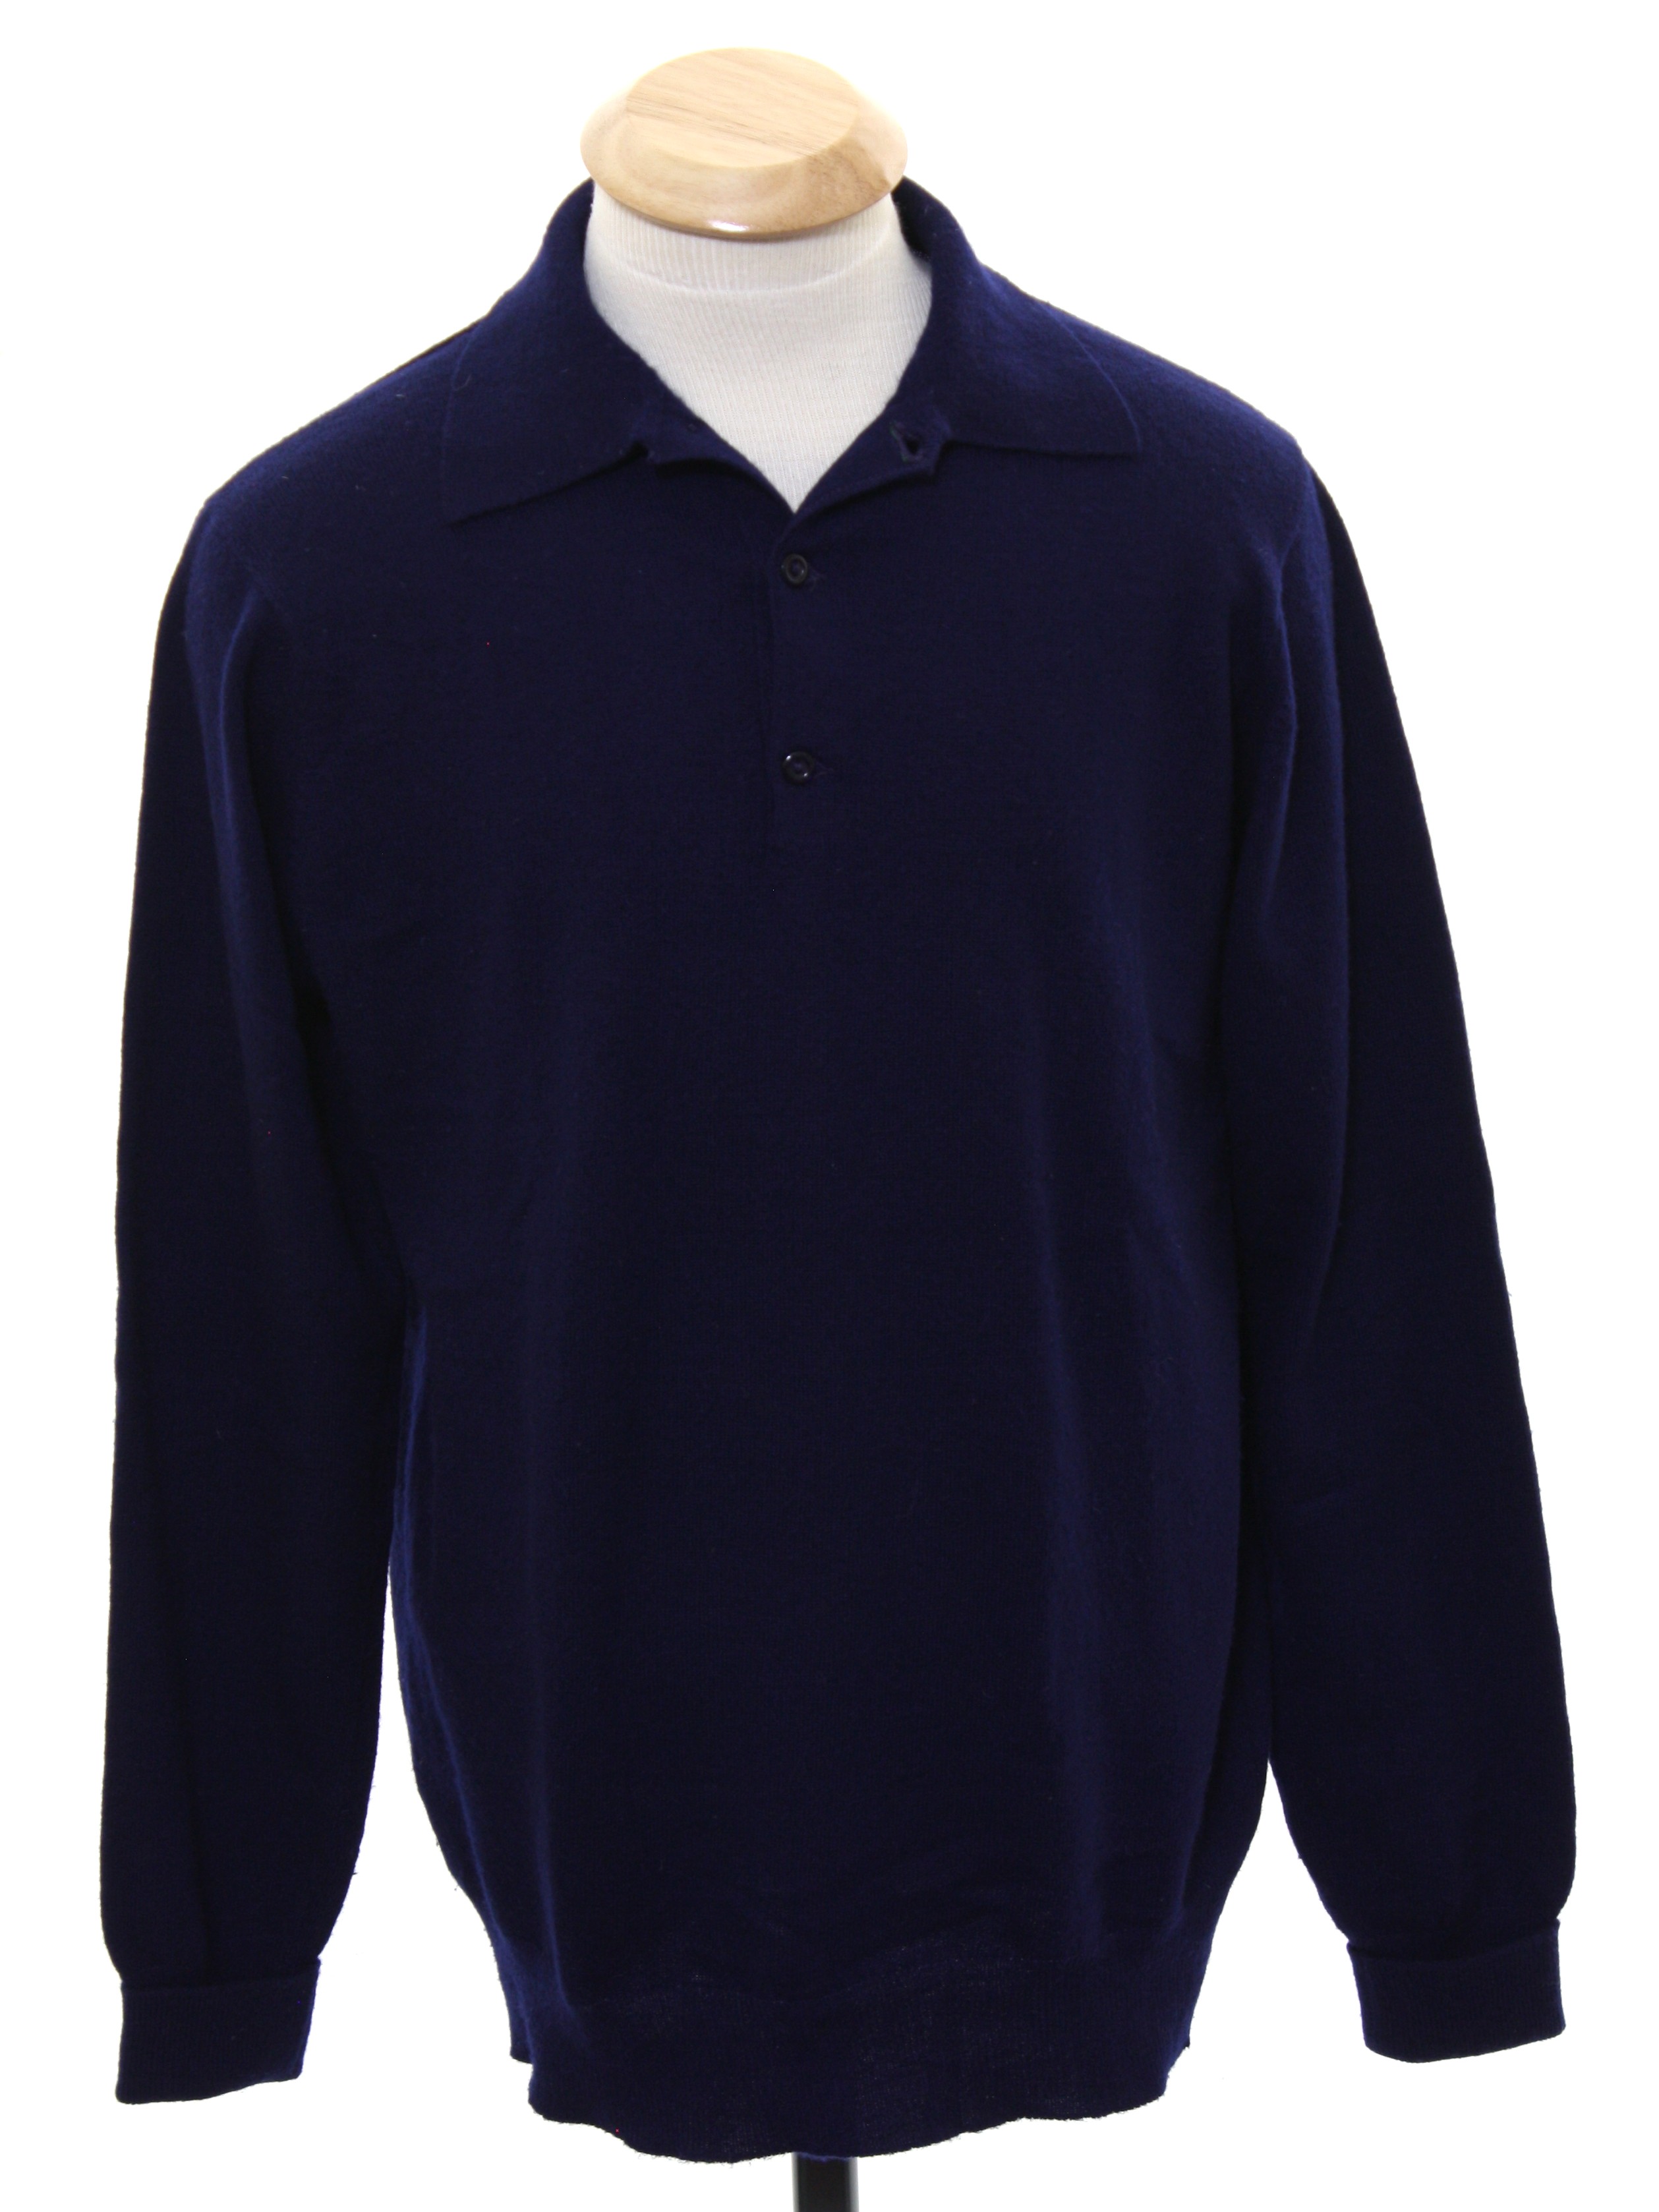 Retro 60's Sweater: Late 60s or Early 70s -S. Fisher- Mens navy blue ...